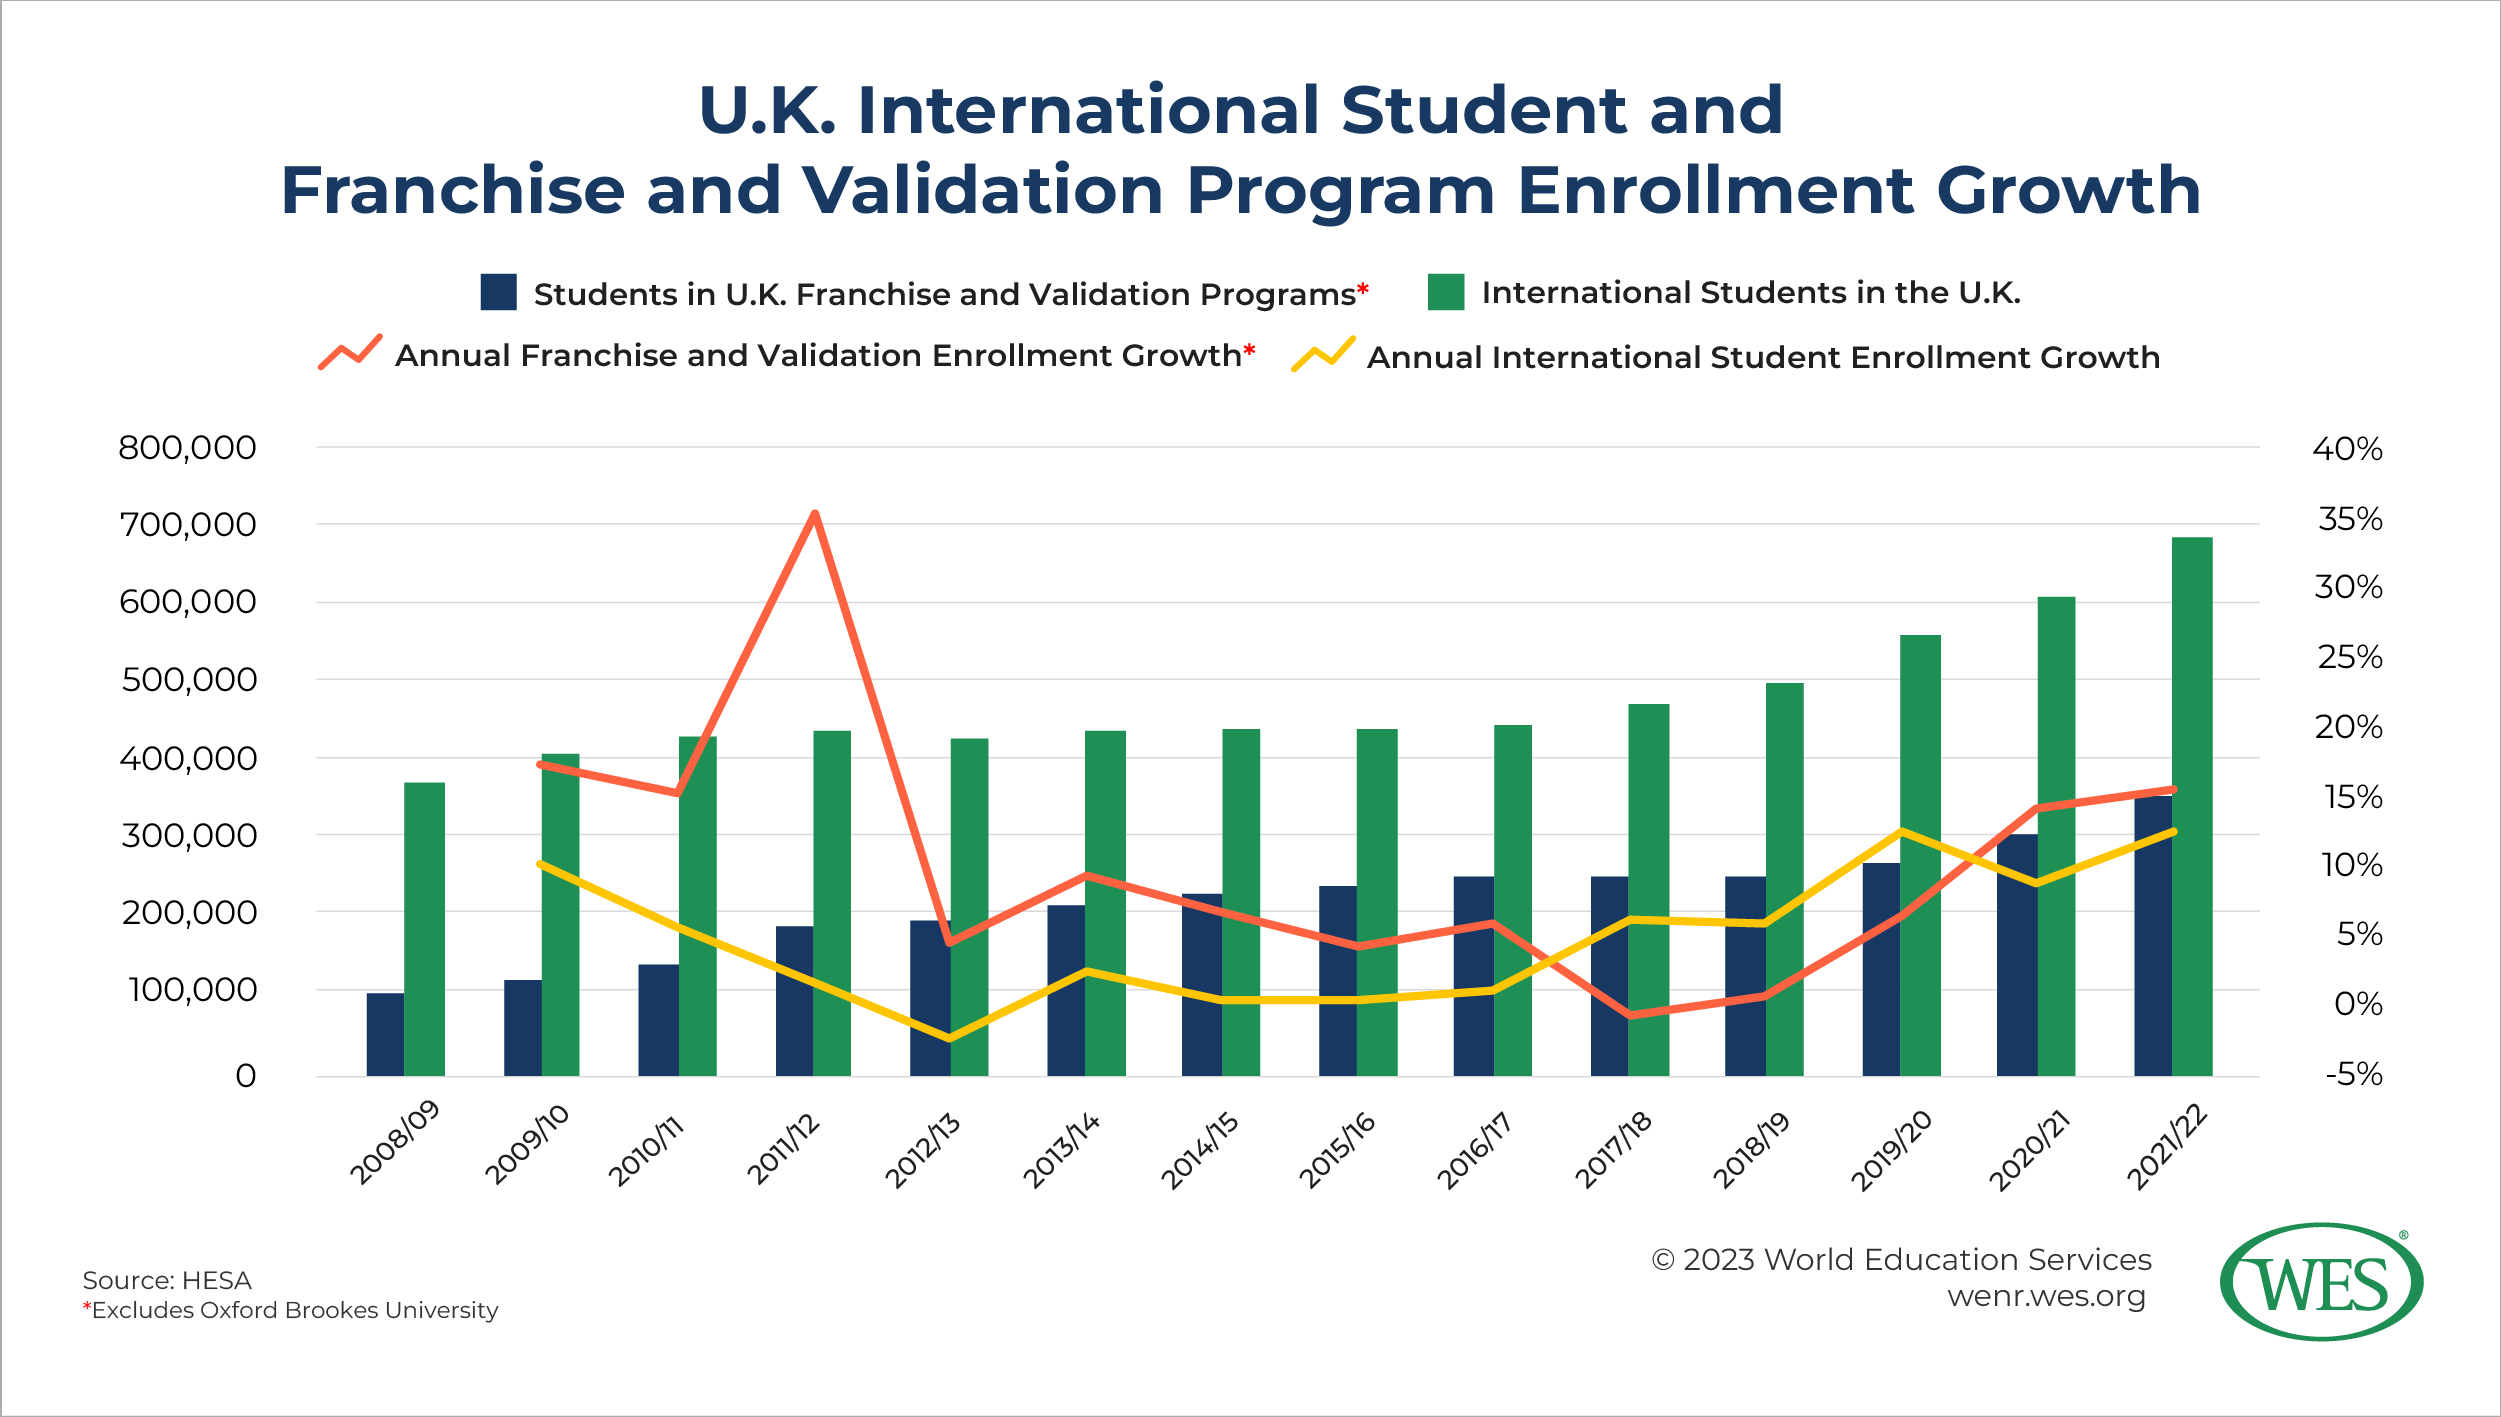 A chart showing annual U.K. international student and franchise and validation enrollment growth between 2008/09 and 2021/22.